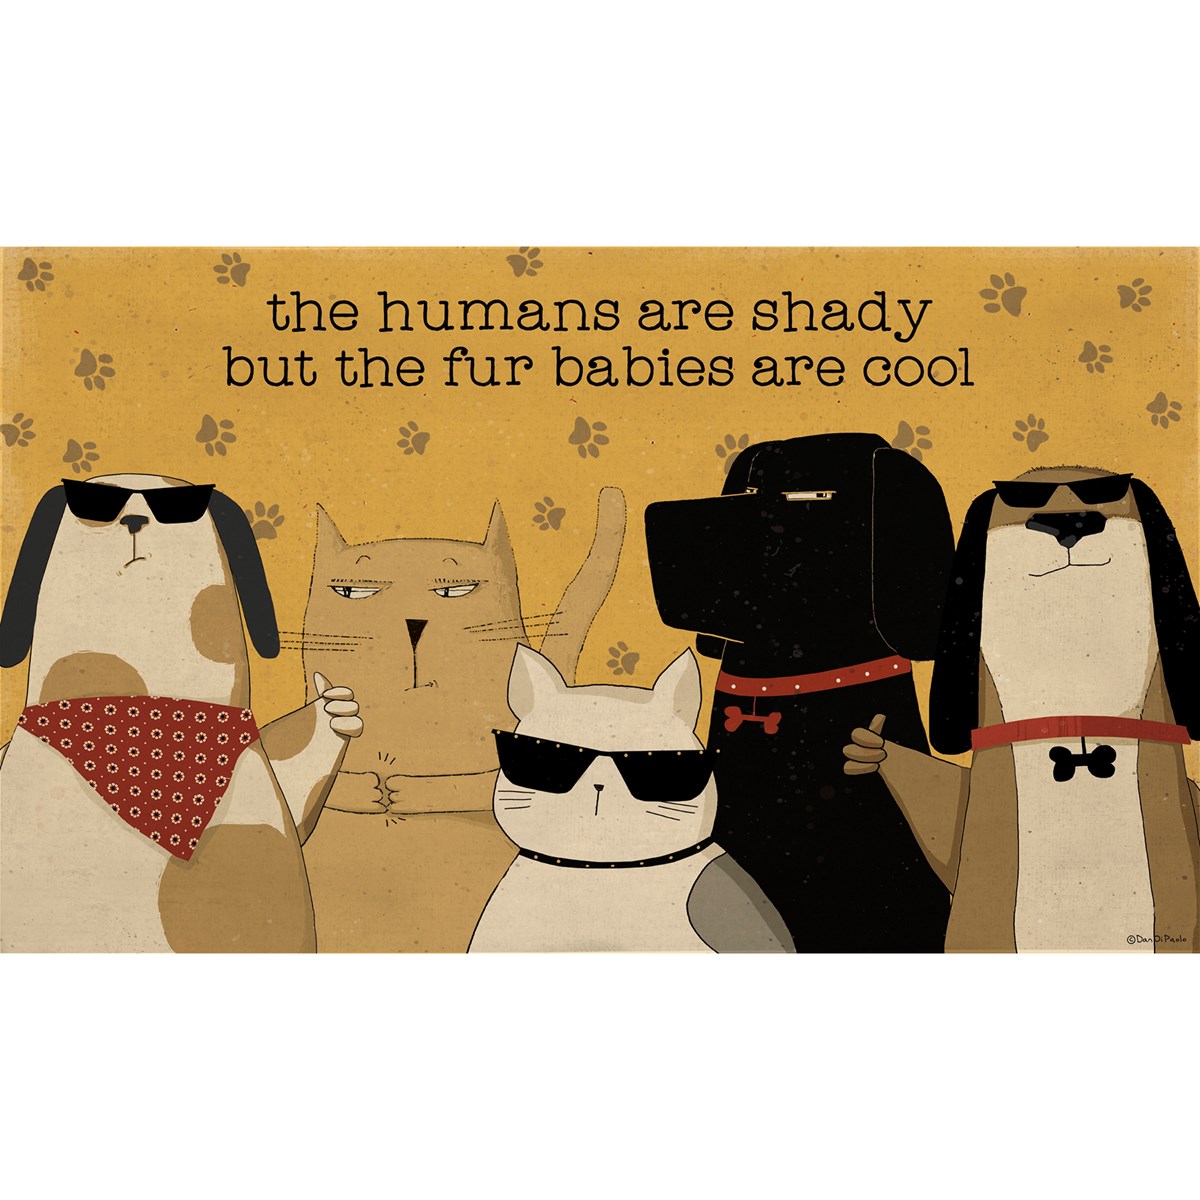 Humans Are Shady But Fur Babies Are Cool Rug - Polyester, PVC skid-resistant backing